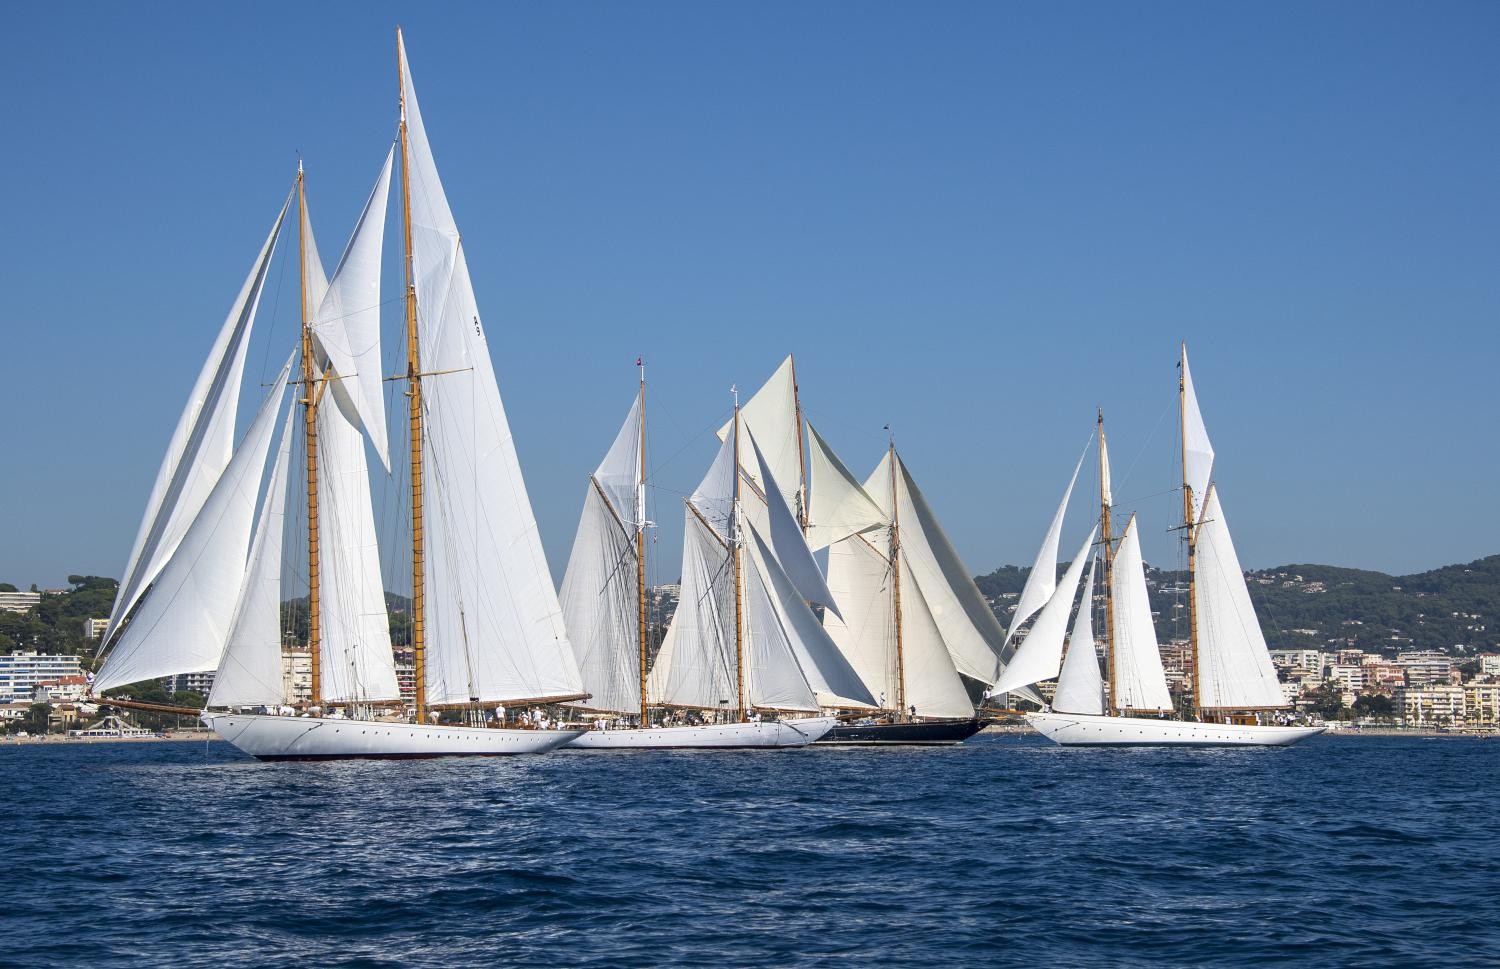 From 8th to 12th  May the world’s largest and most beautiful classic schooners will line up off Capri